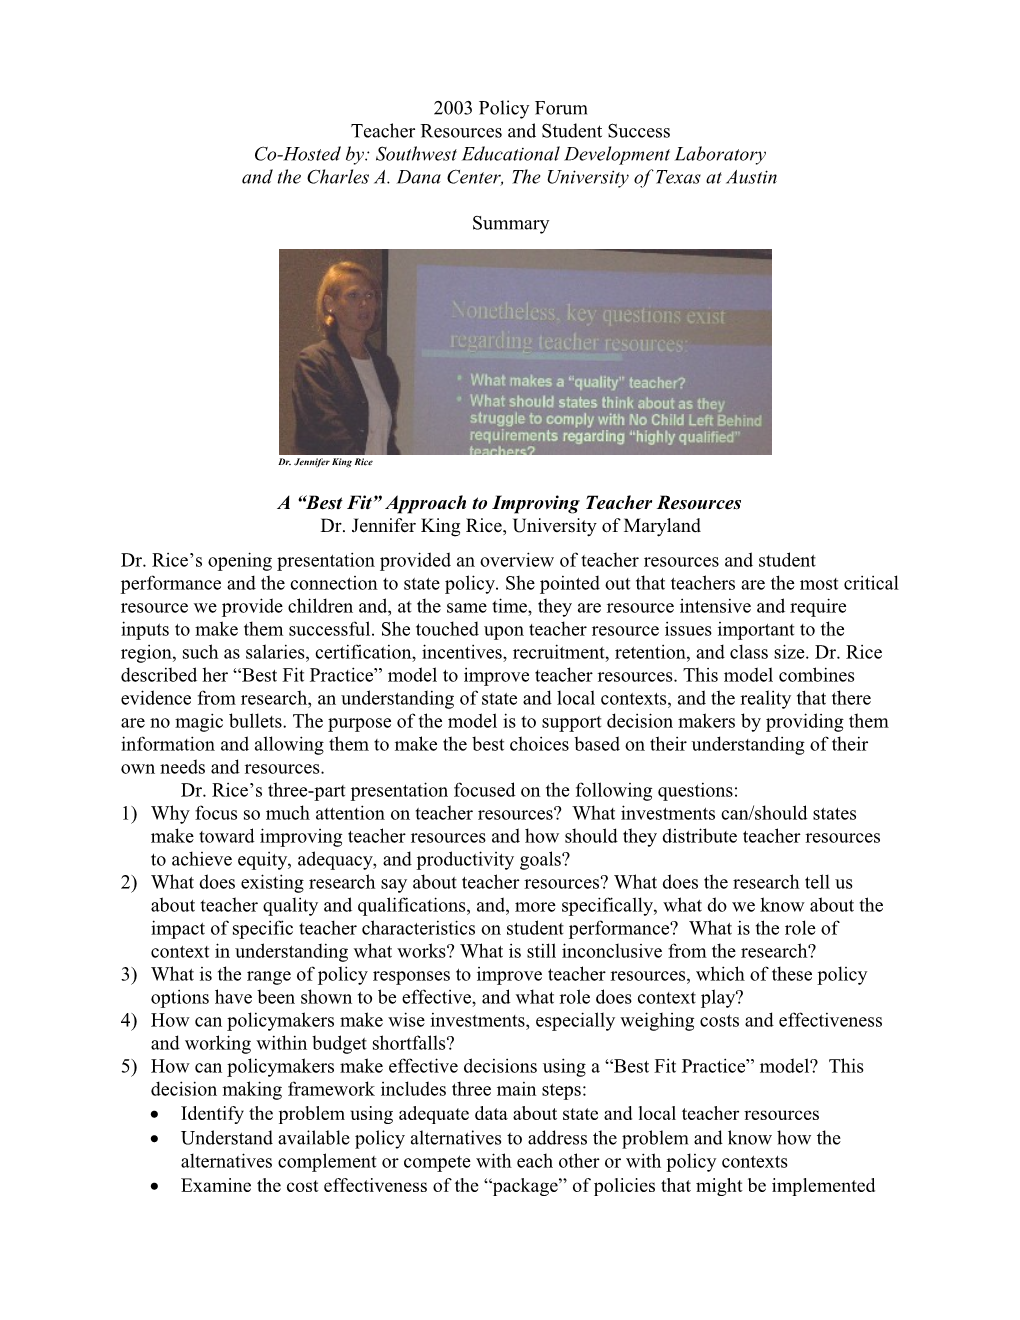 2003 Policy Forum Summary Page 4